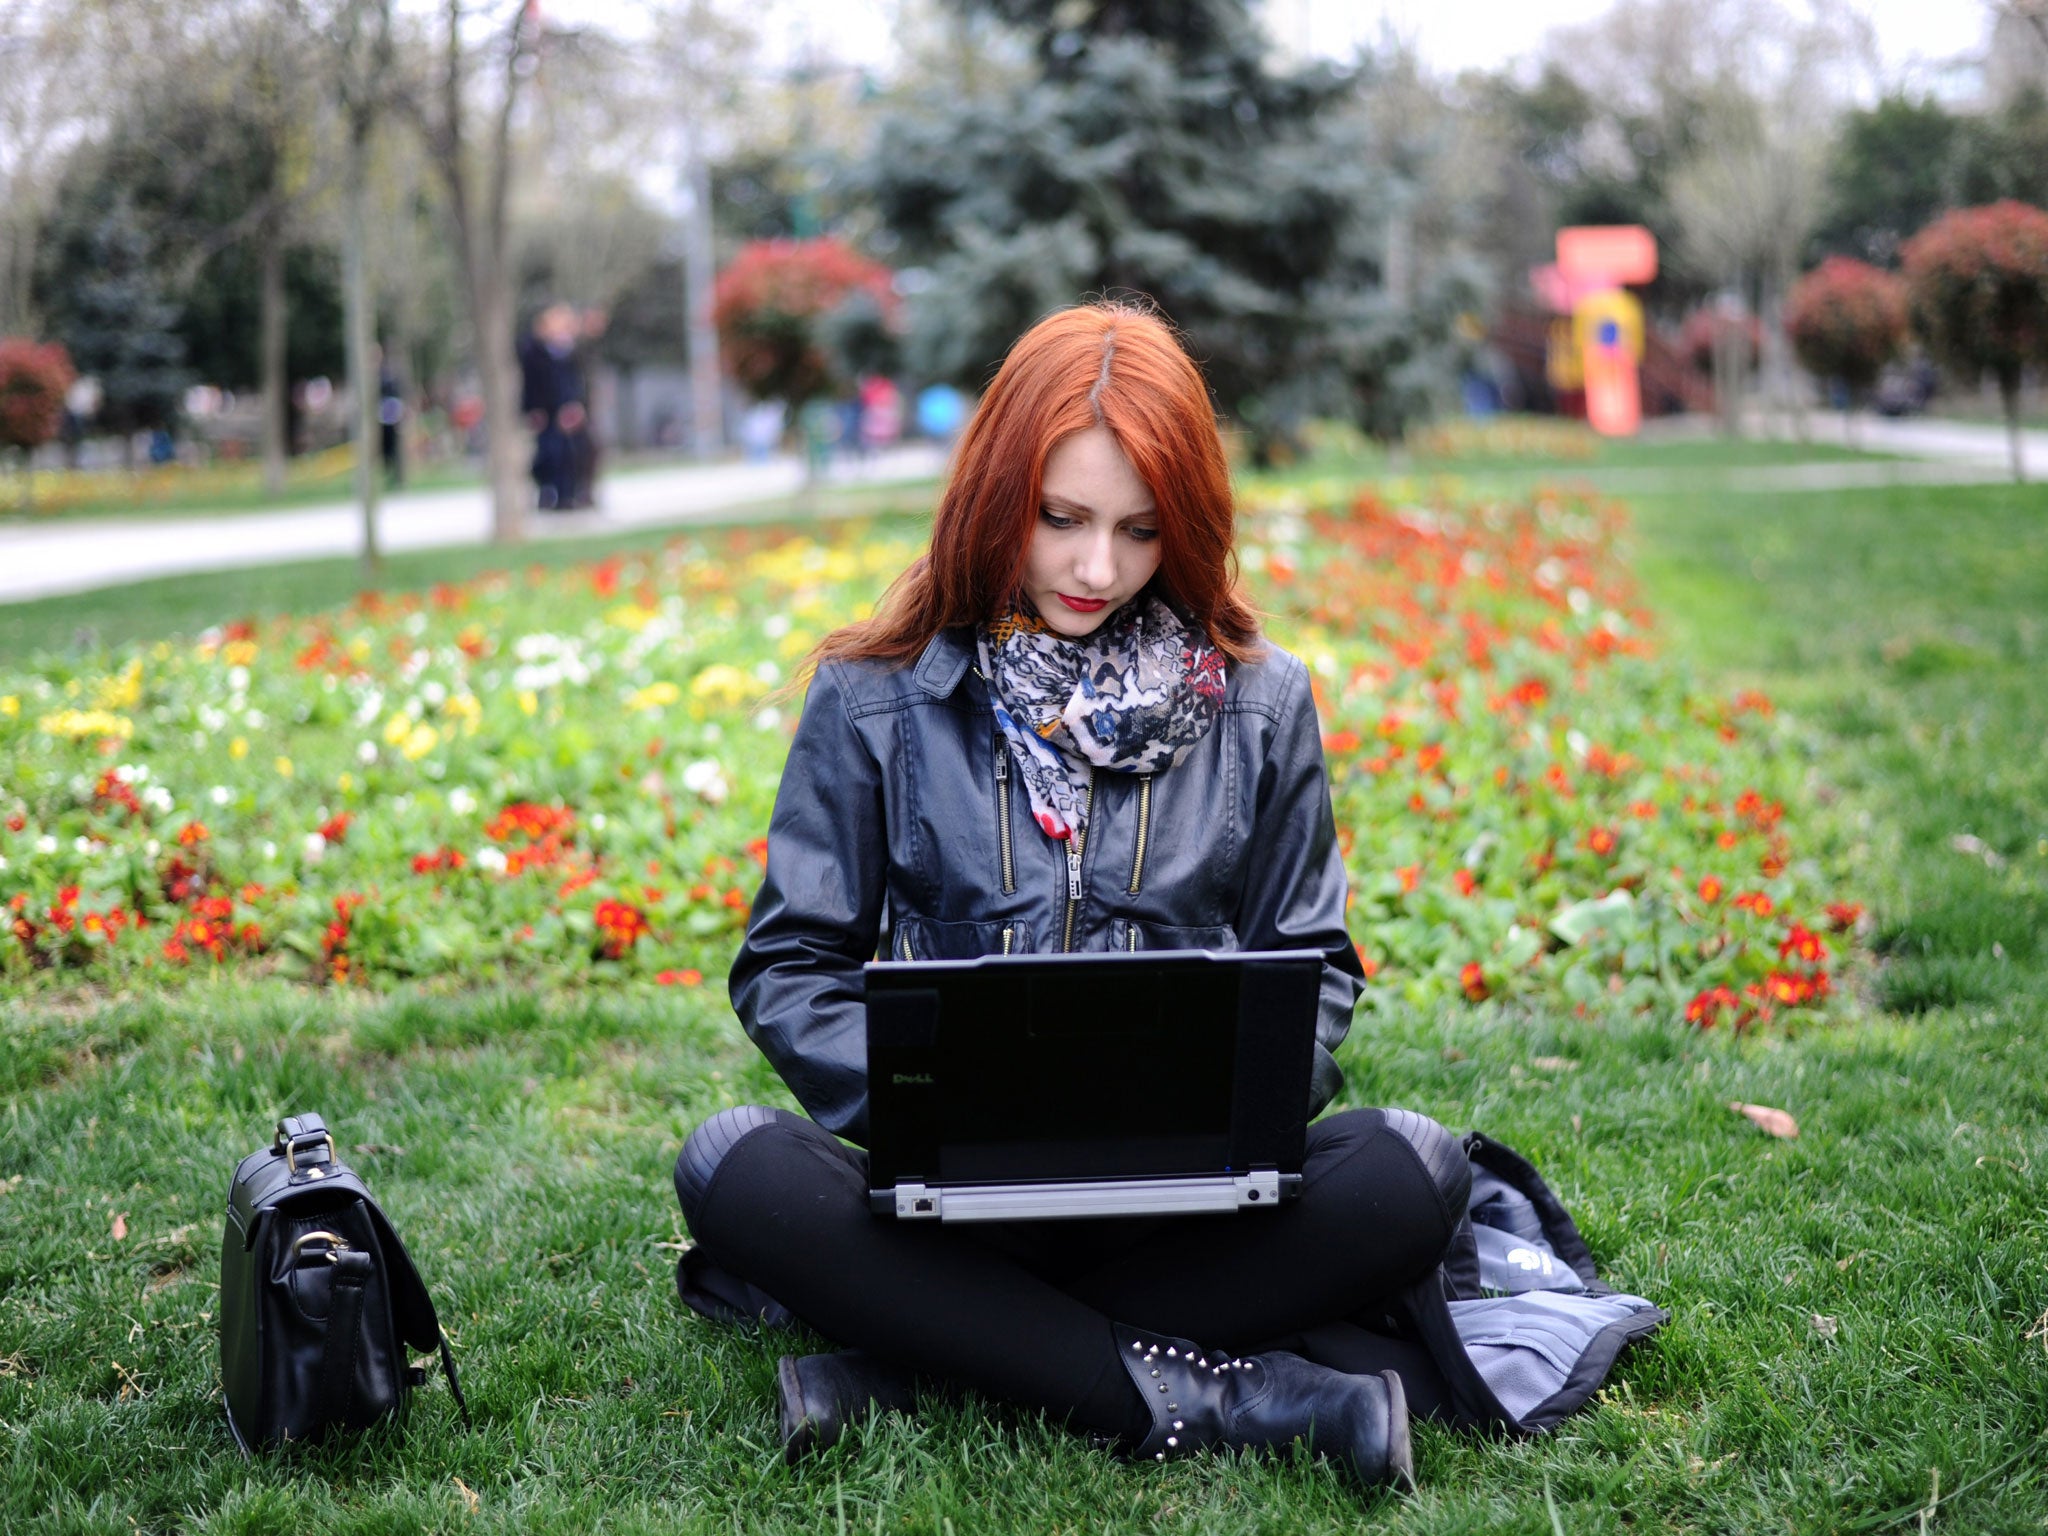 The University of Pennsylvania will soon offer a course called 'Wasting Time on the Internet'